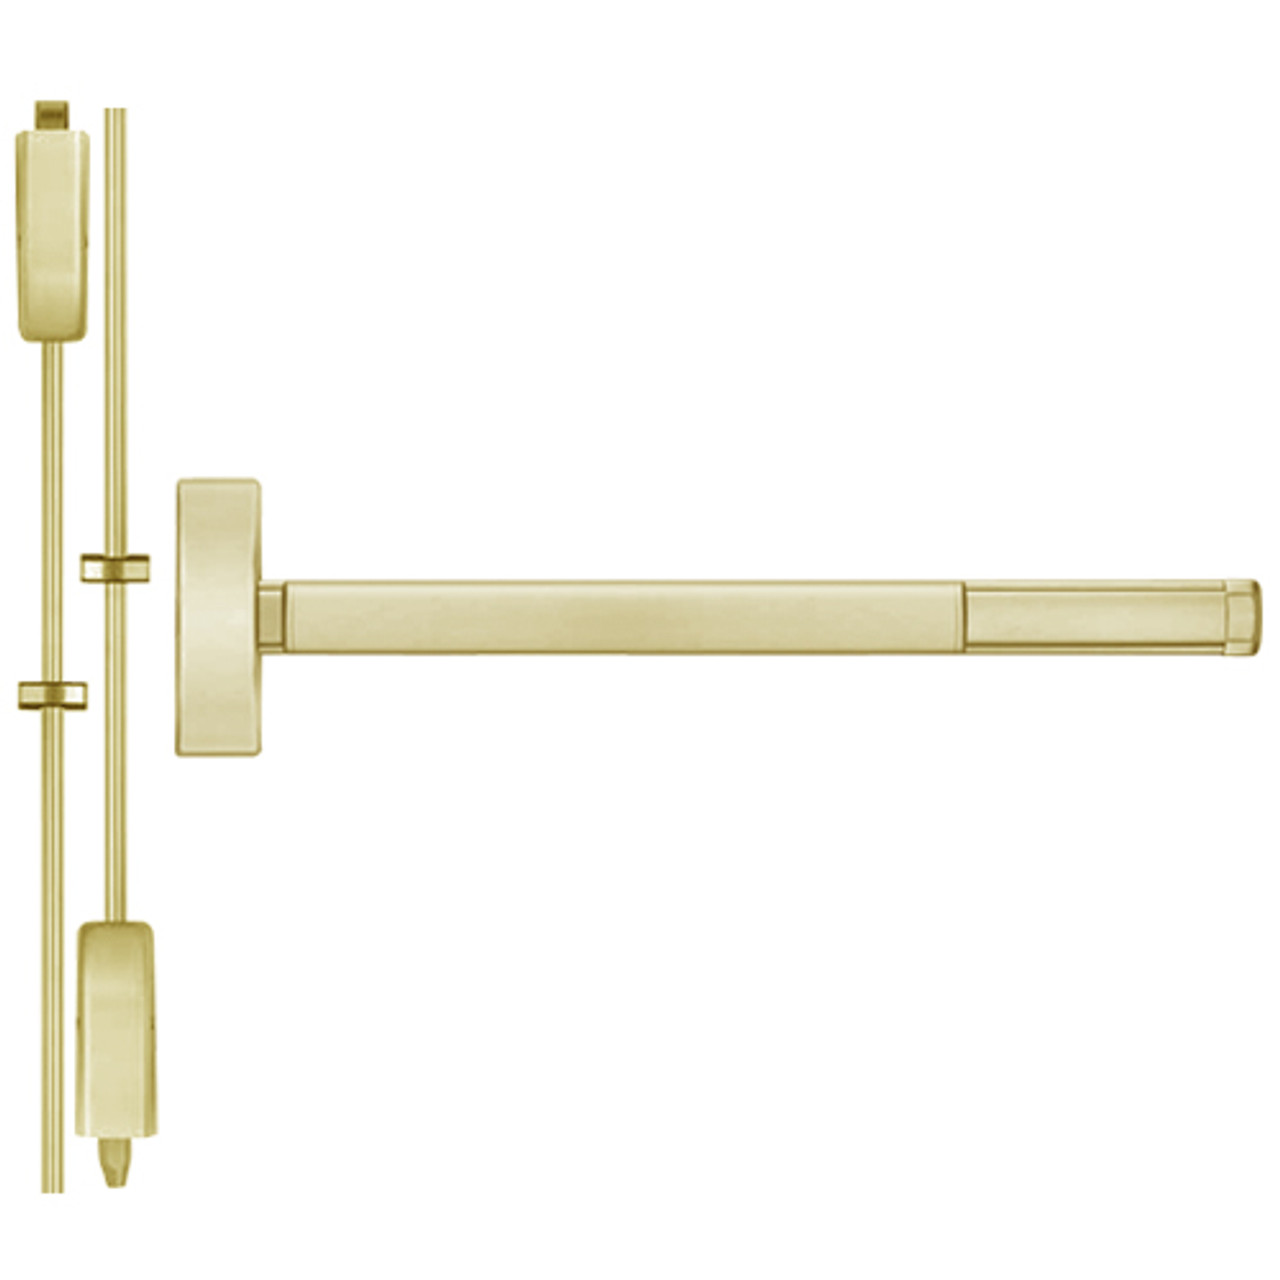 TSFL2205LBR-606-36 PHI 2200 Series Apex Surface Vertical Rod Device with Touchbar Monitoring Switch Prepped for Key Controls Thumb Piece in Satin Brass Finish